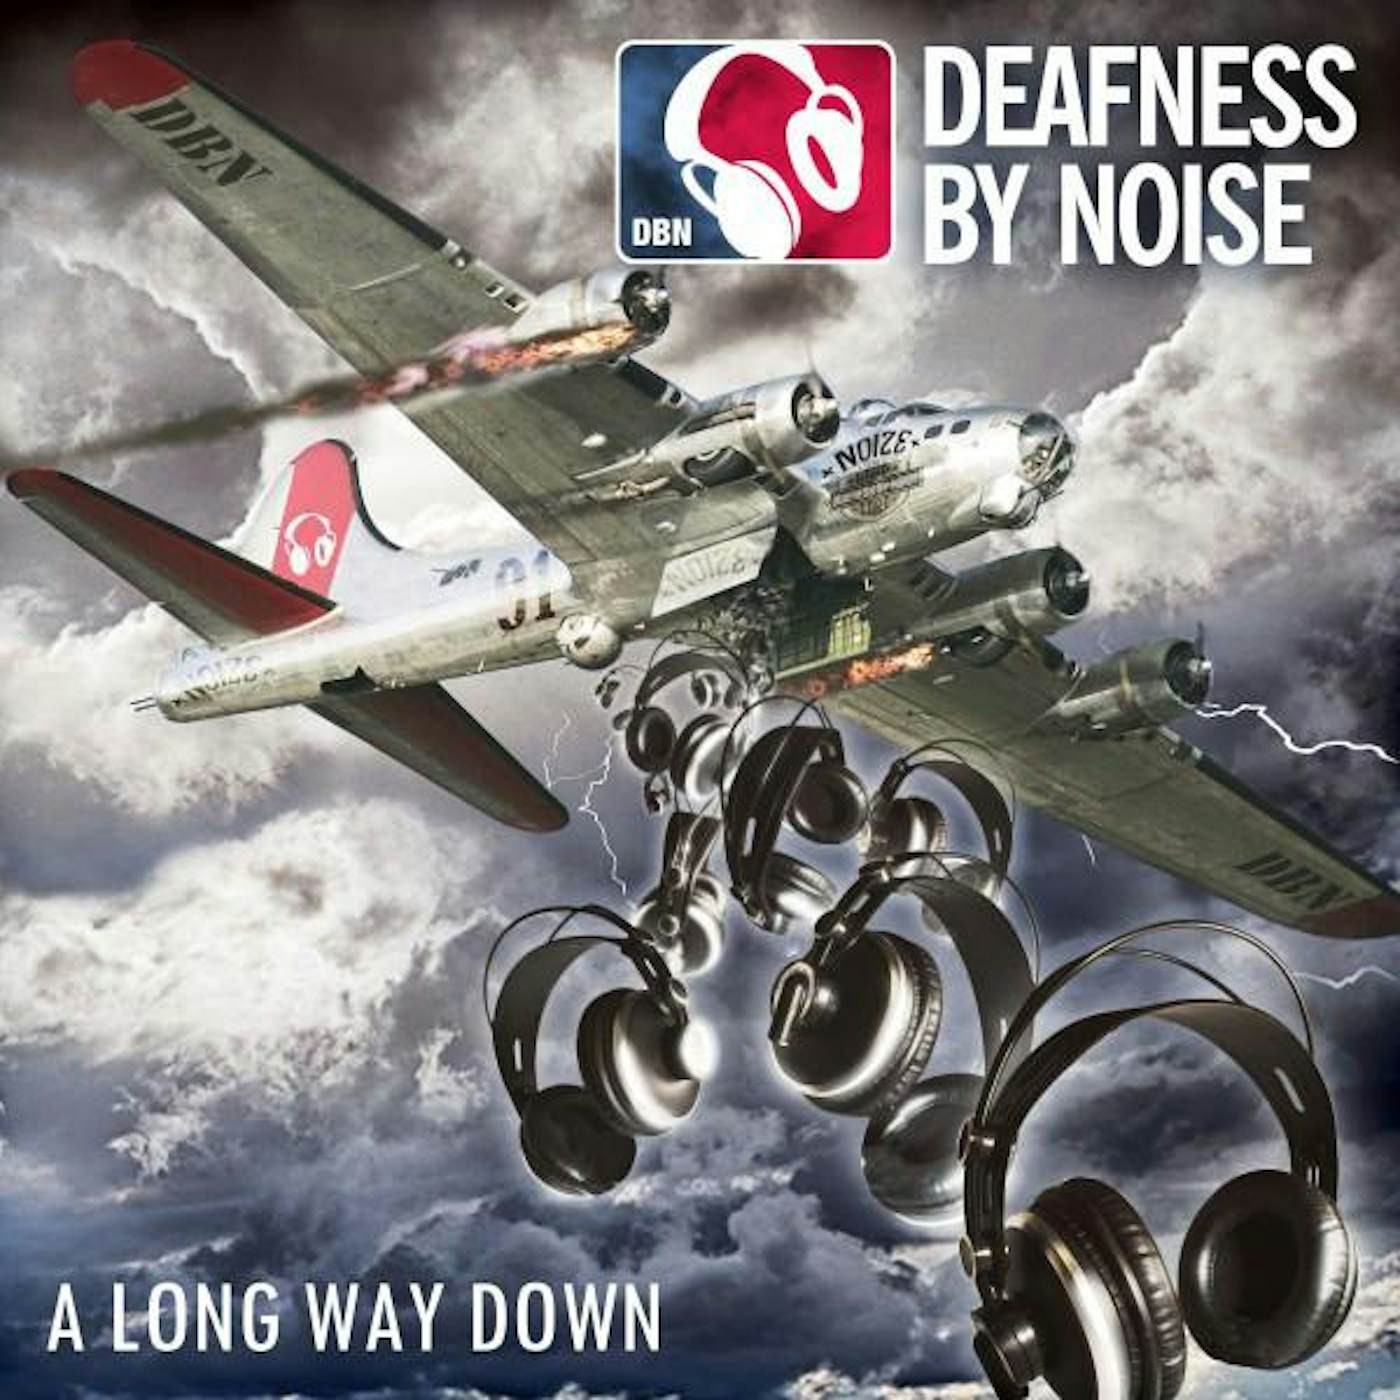 Deafness by Noise